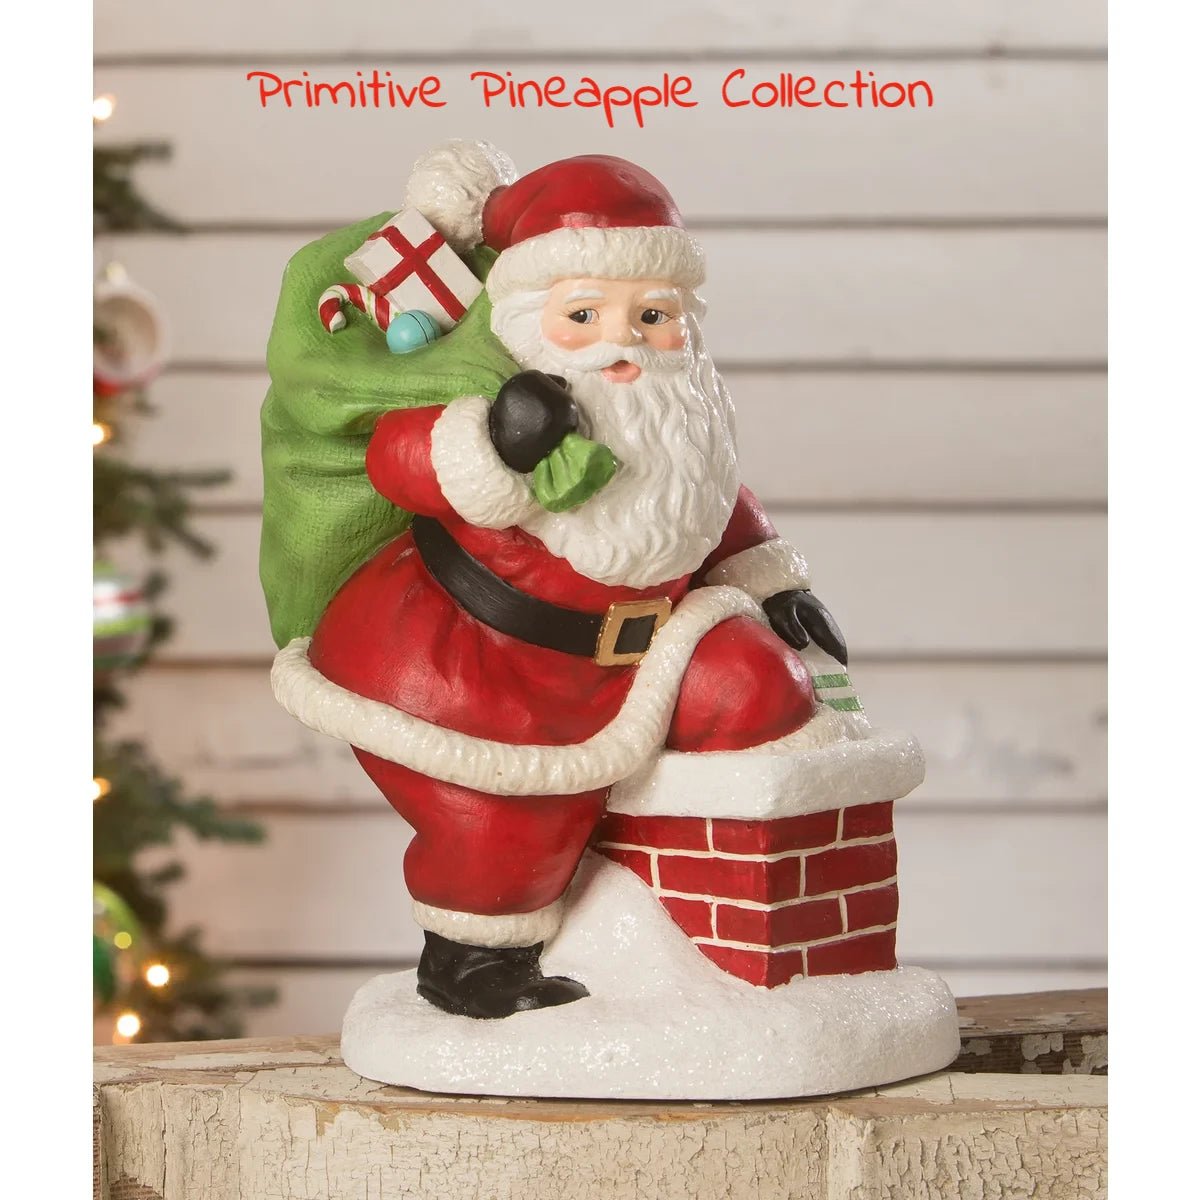 Handcrafted Bethany Lowe Collectables - The Primitive Pineapple Collection